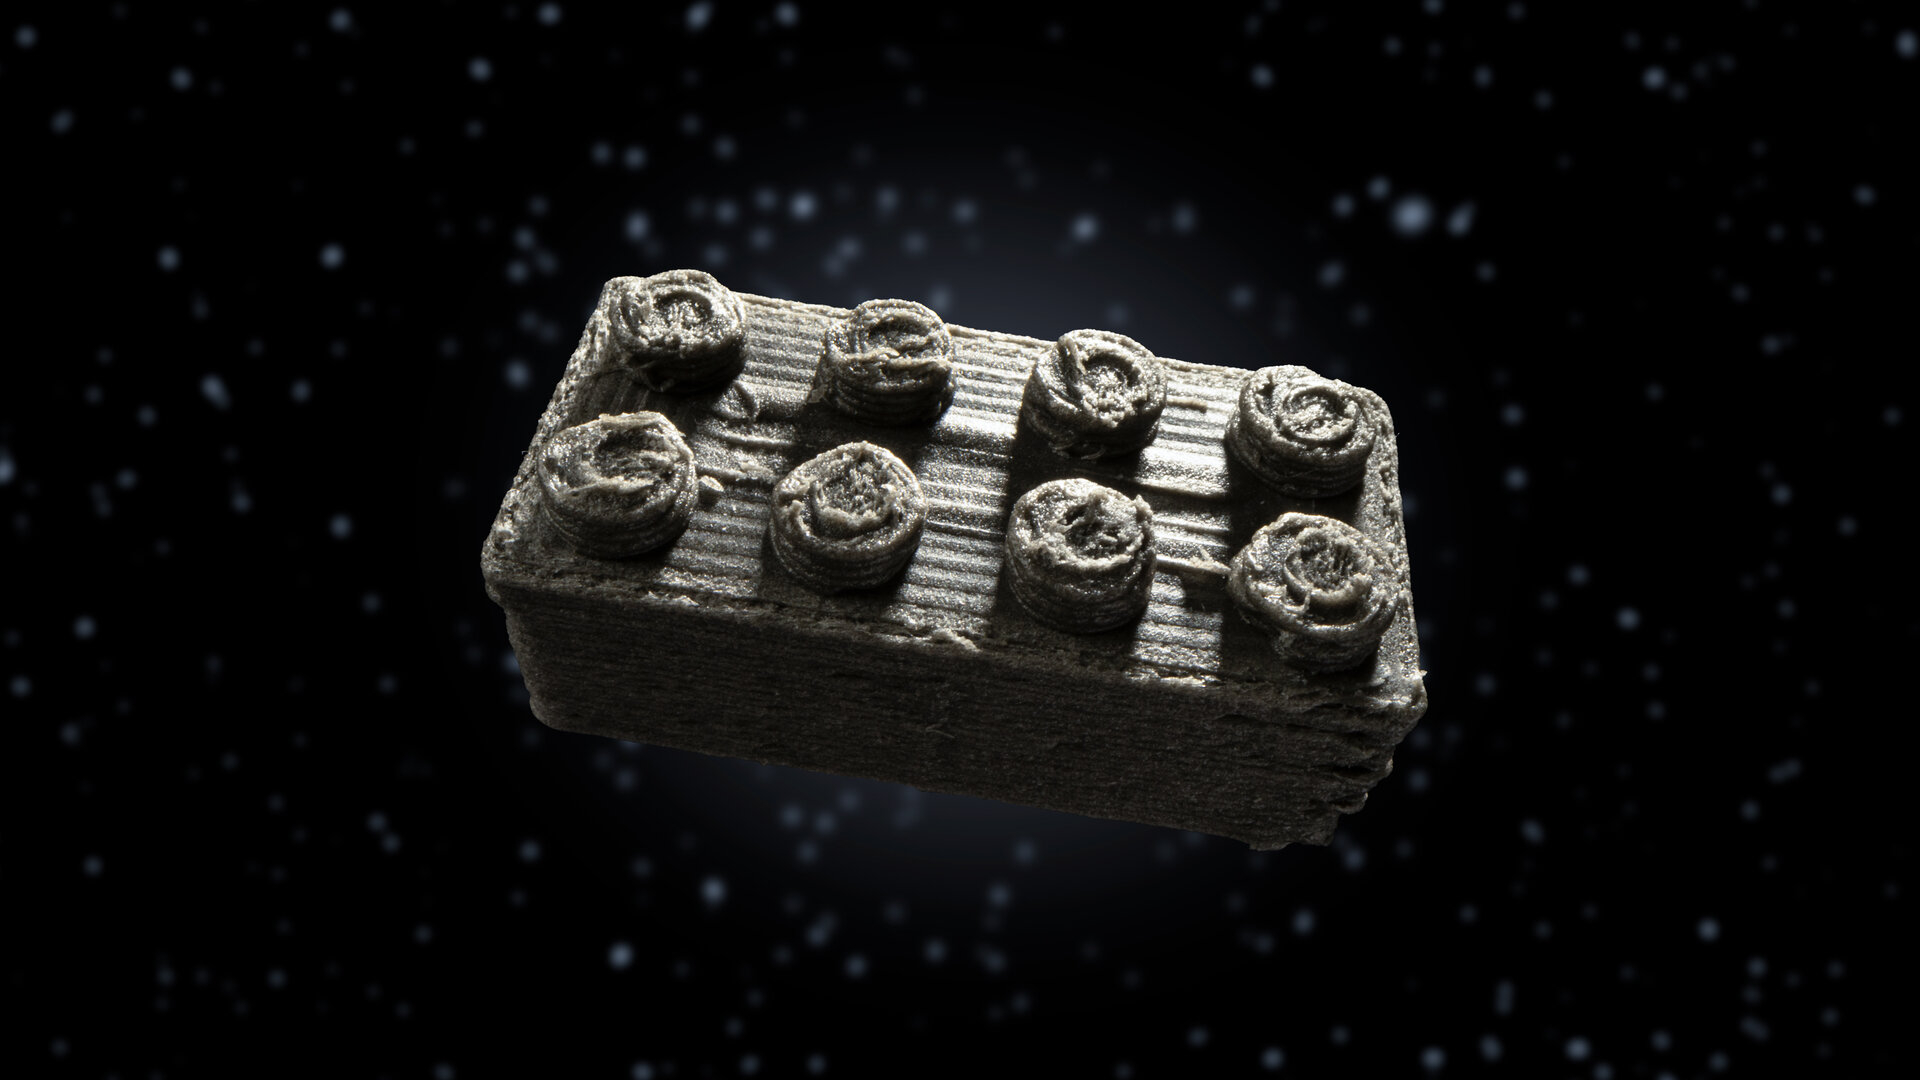 Lego-inspired ‘space bricks’ could help scientists design moon habitats. Here’s how Space